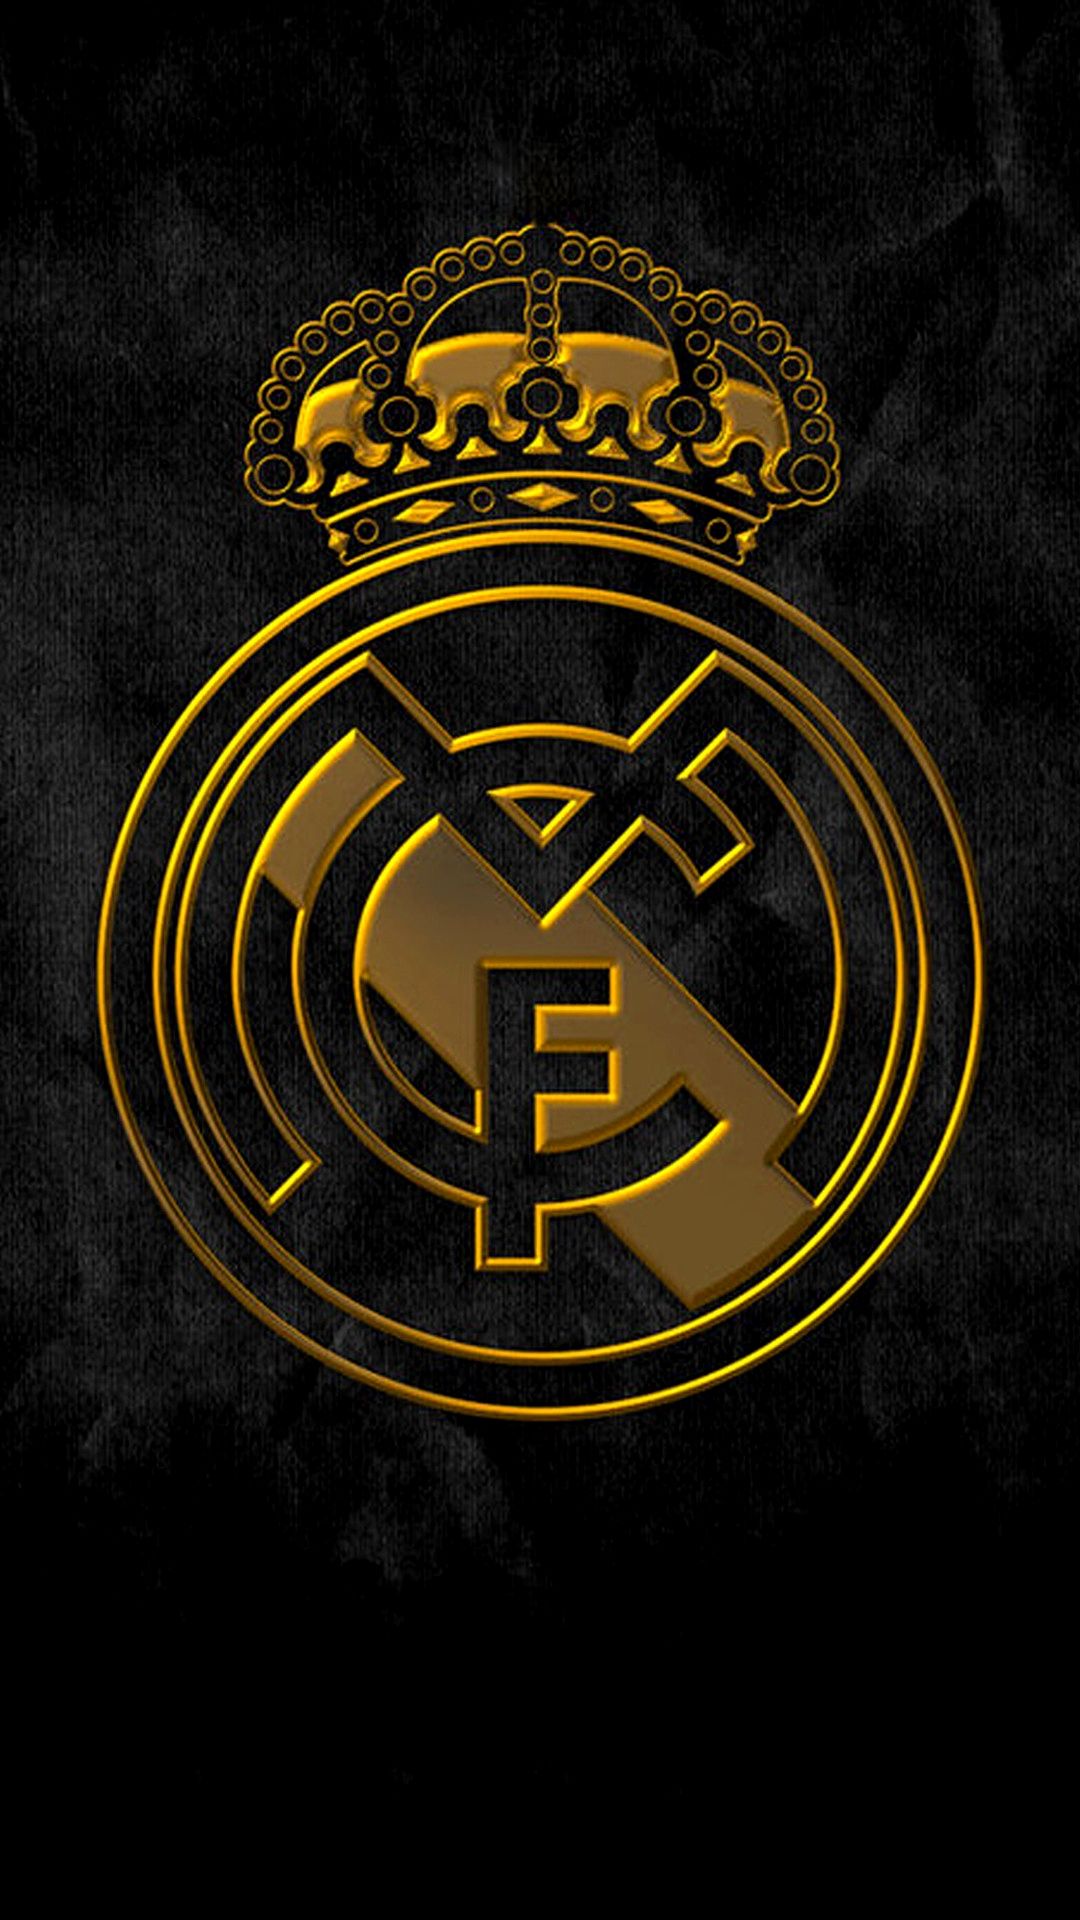 Iphone, Logo, Madrid, Real, real madrid wallpapers 4k, Trick, Wallpaper - Real Madrid Wallpaper 4K iPhone